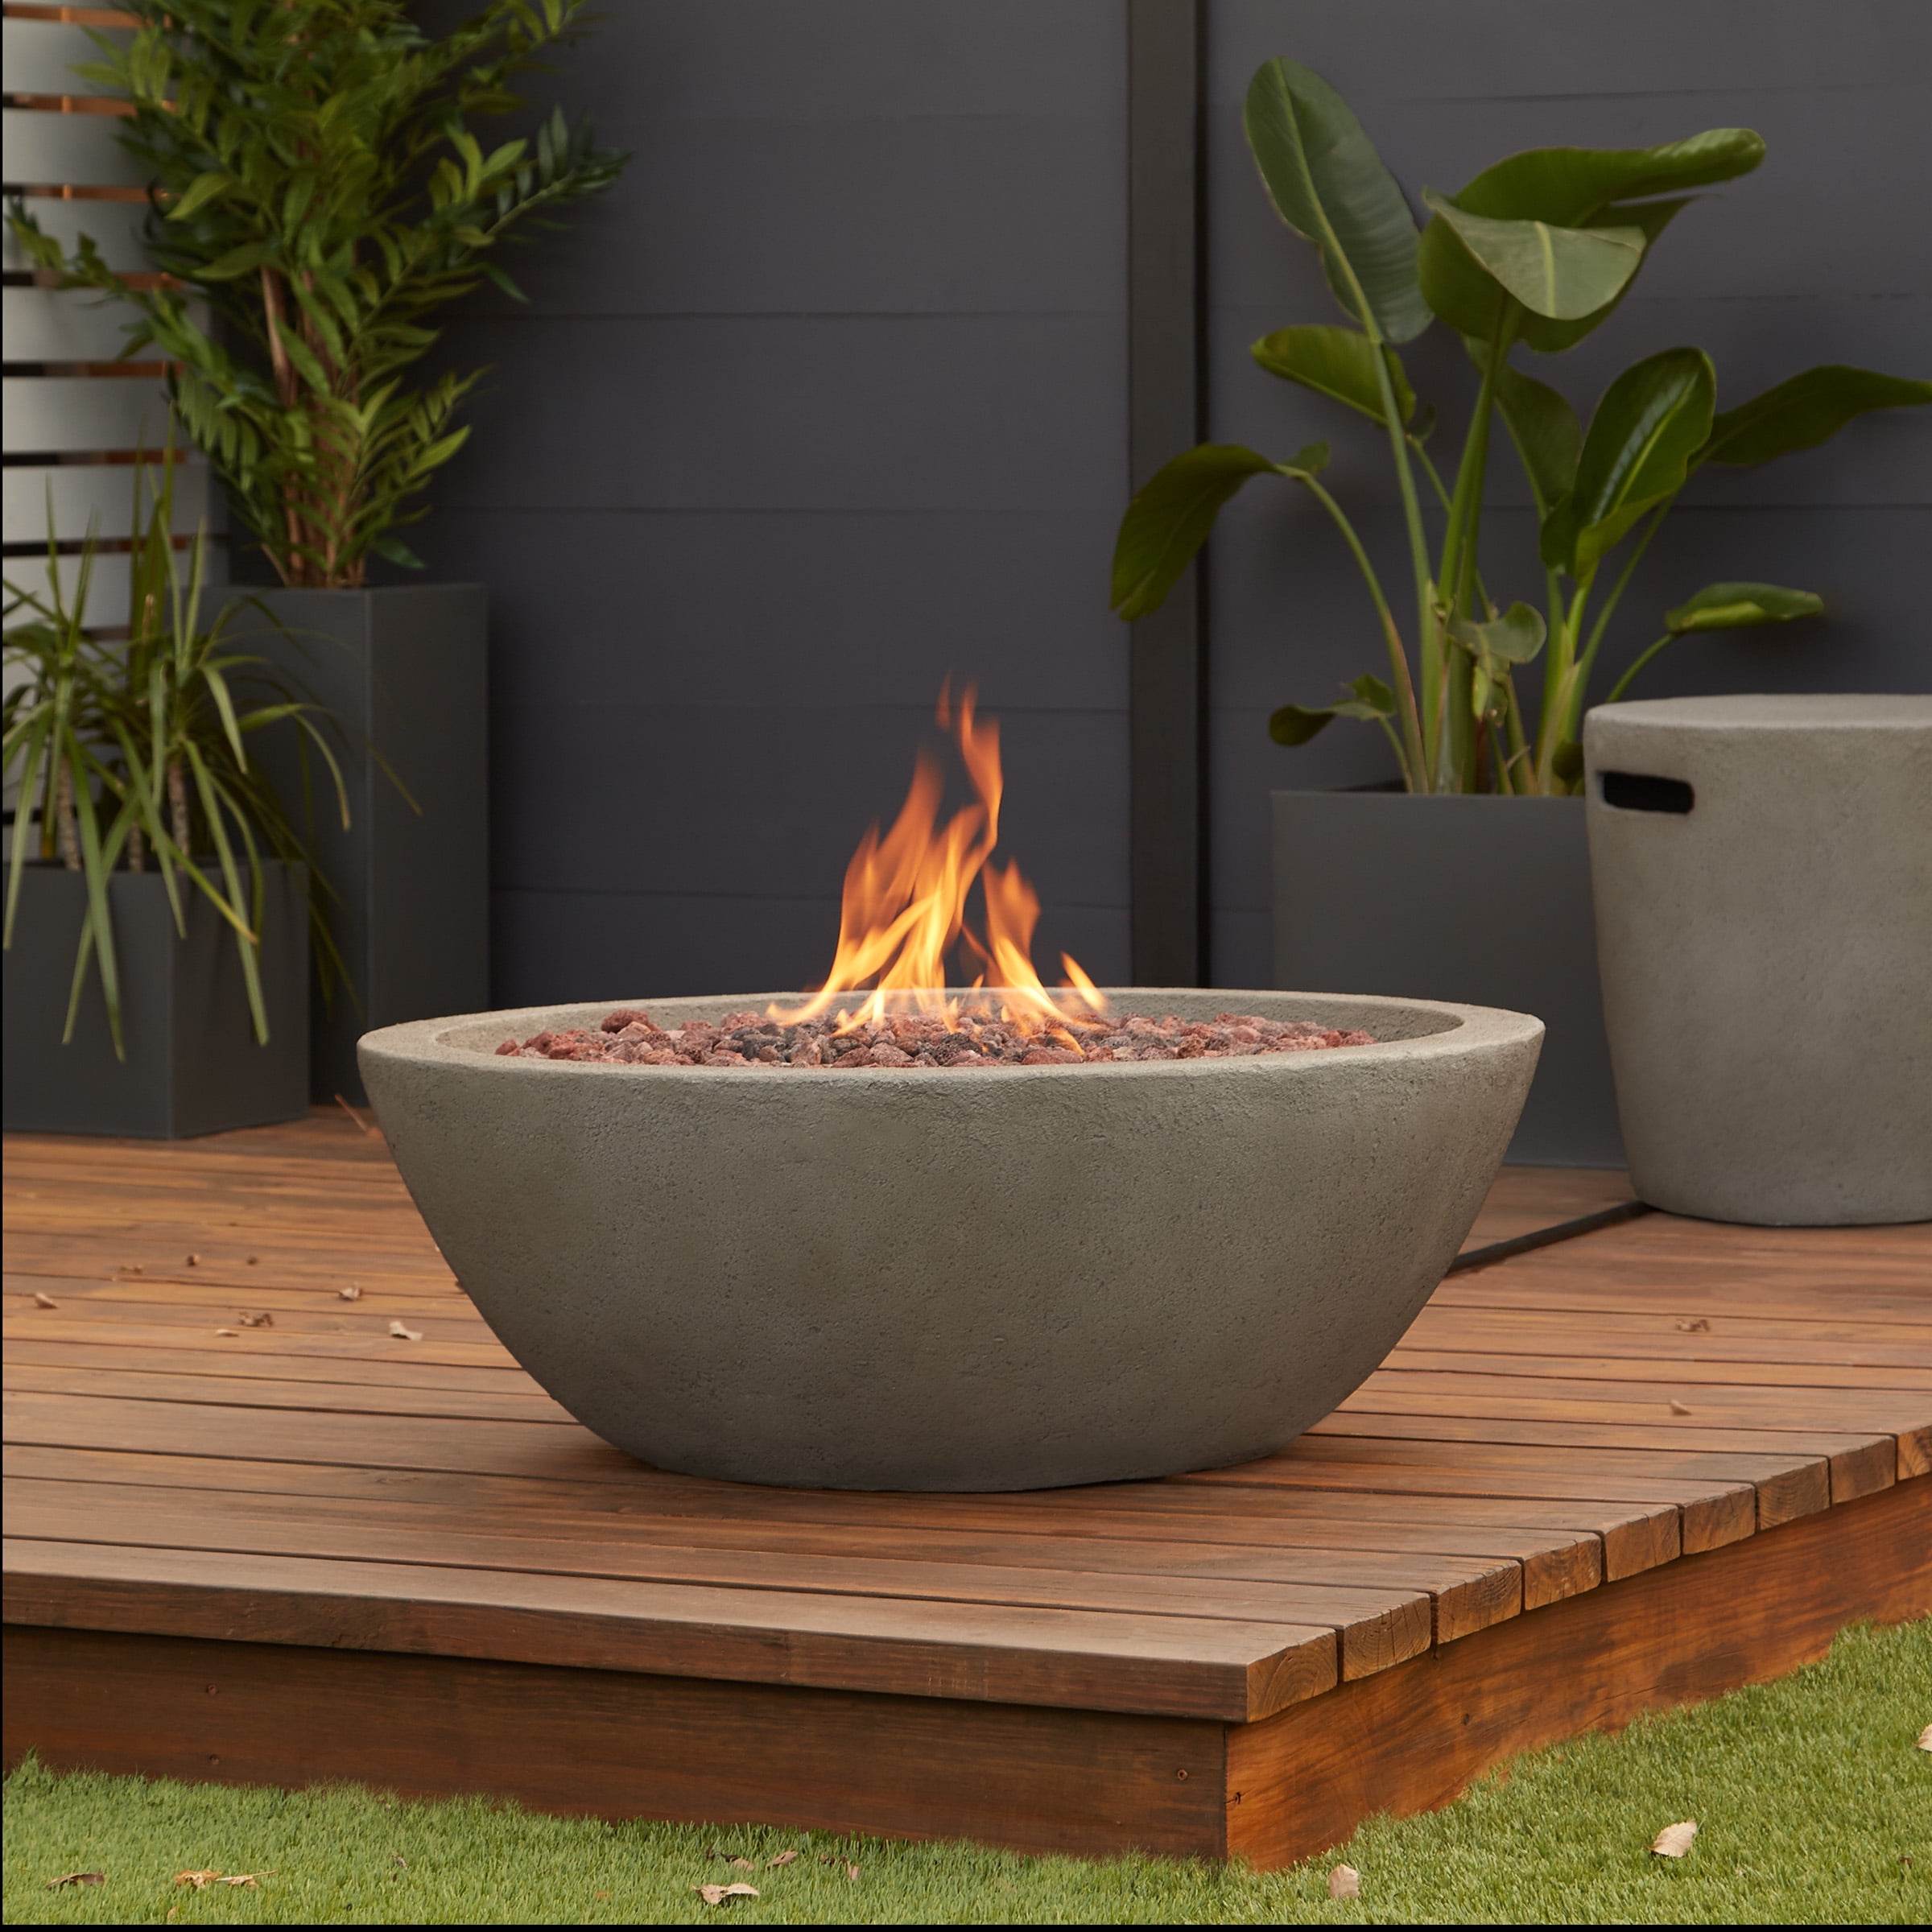 Baltic Rectangle Propane Fire Table In, Baltic Square Fire Pit Table